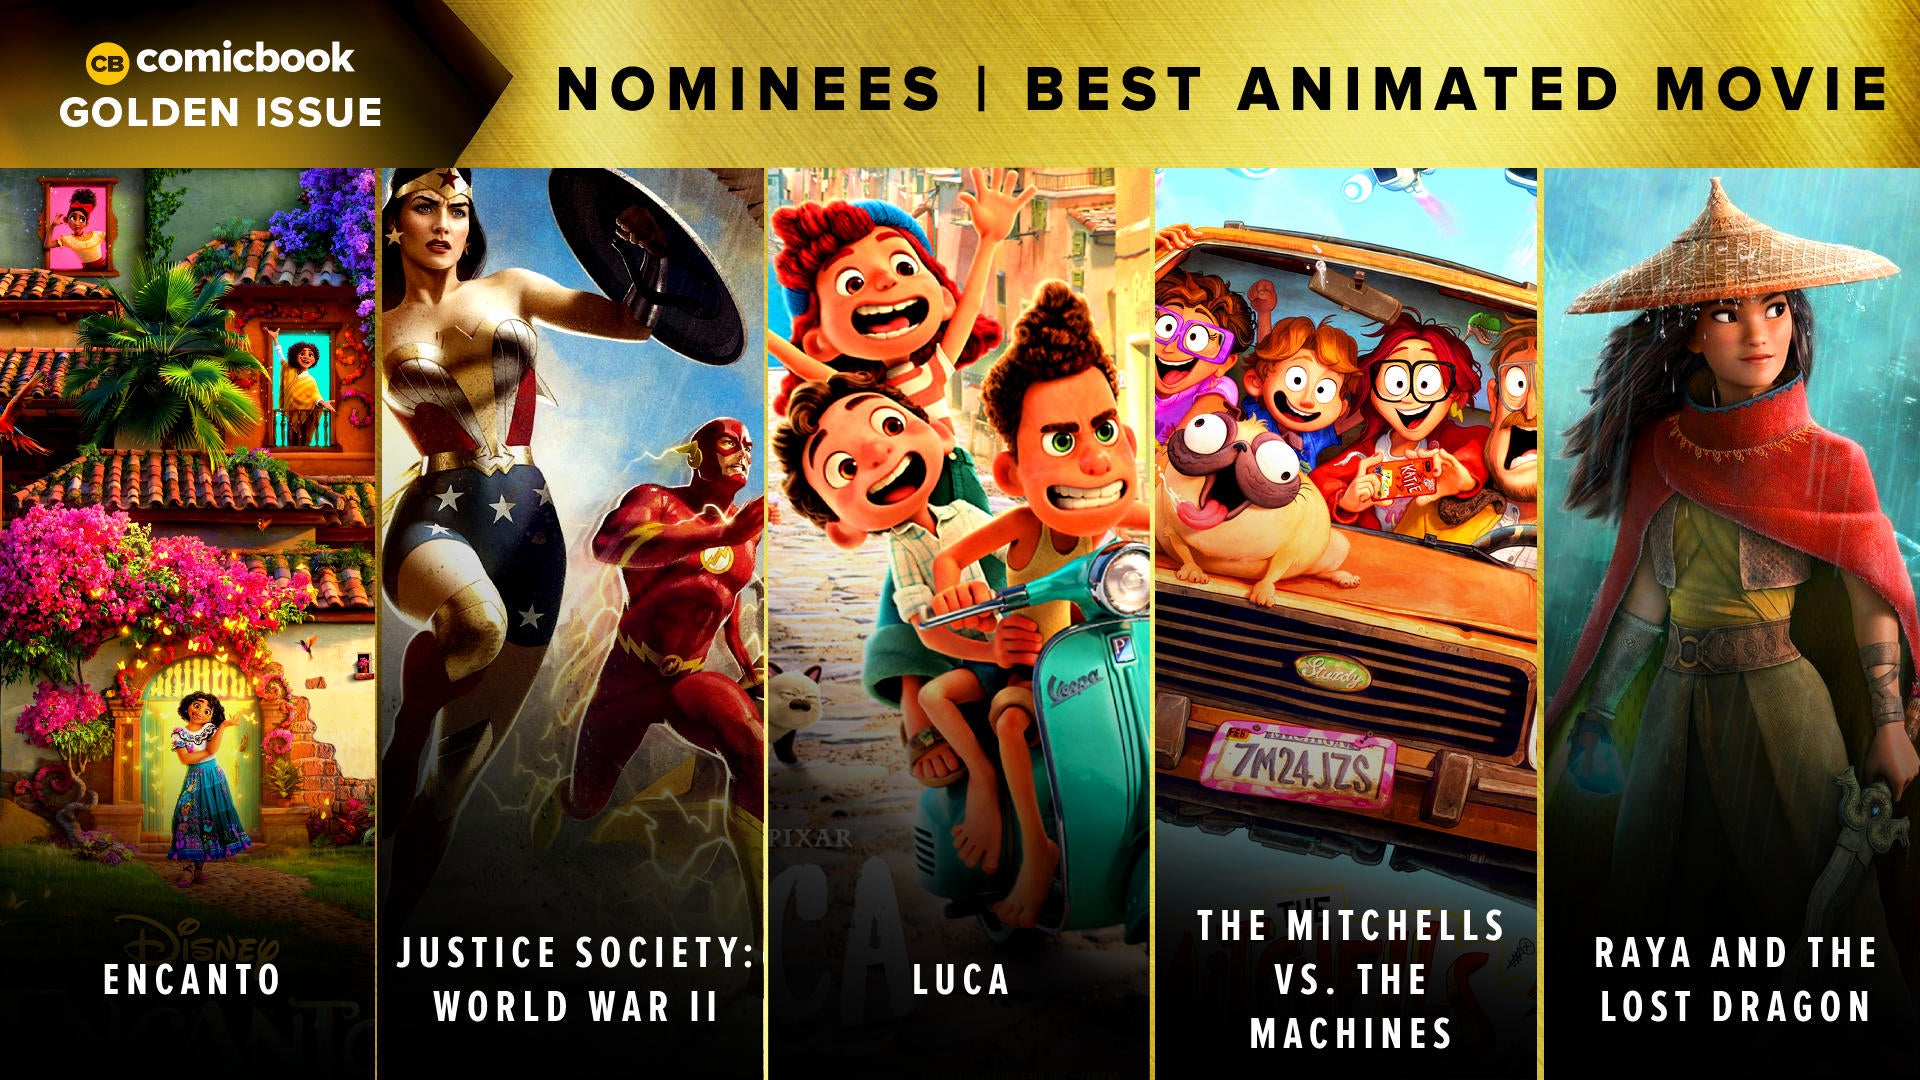 golden-issues-2021-nominees-best-animated-movie.jpg